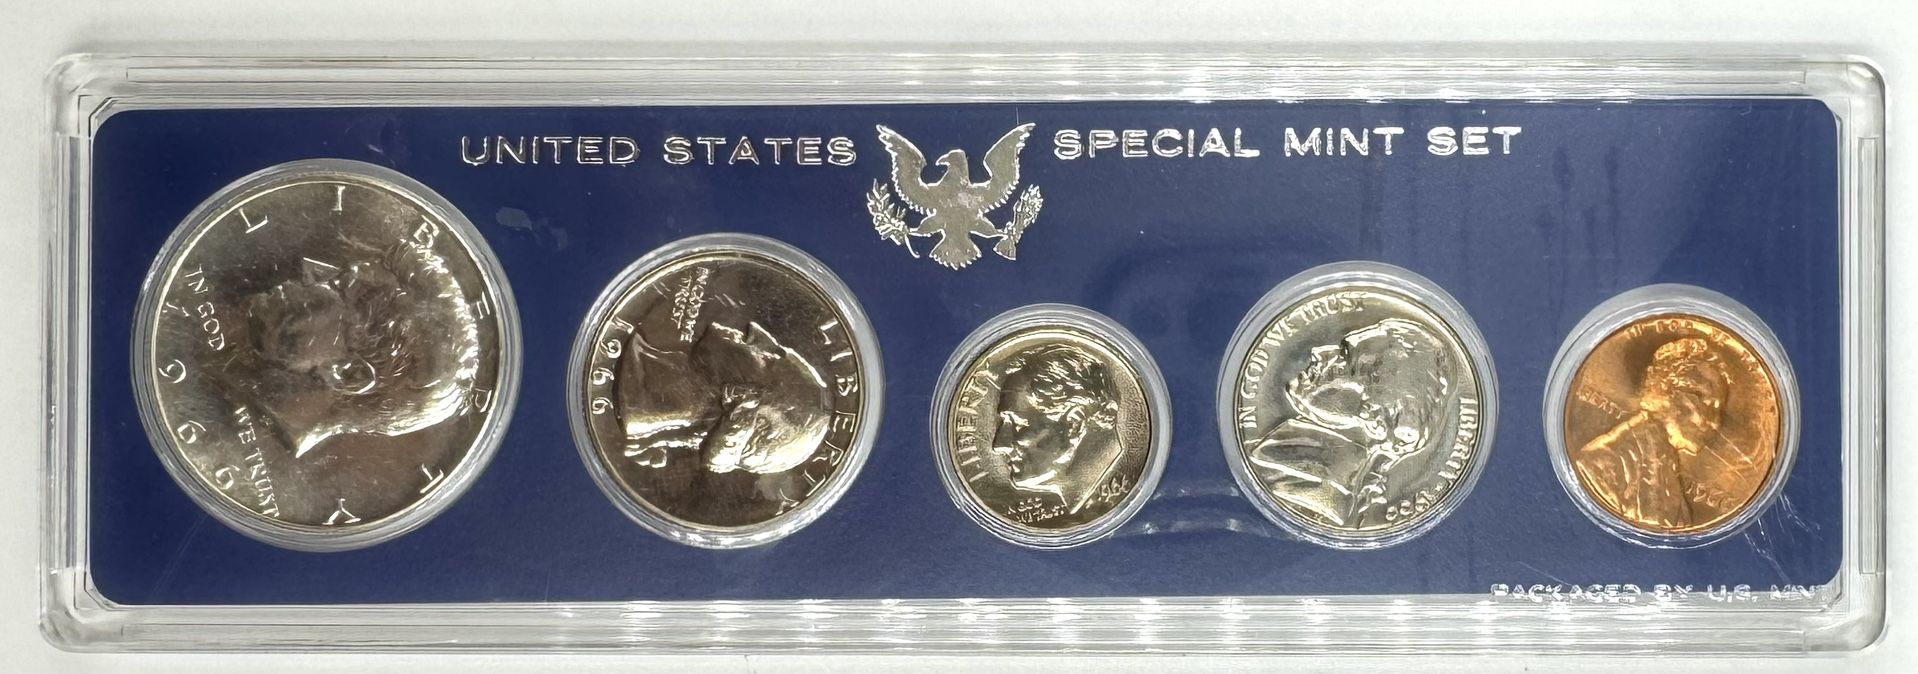 1966 United States Special Mint Set 